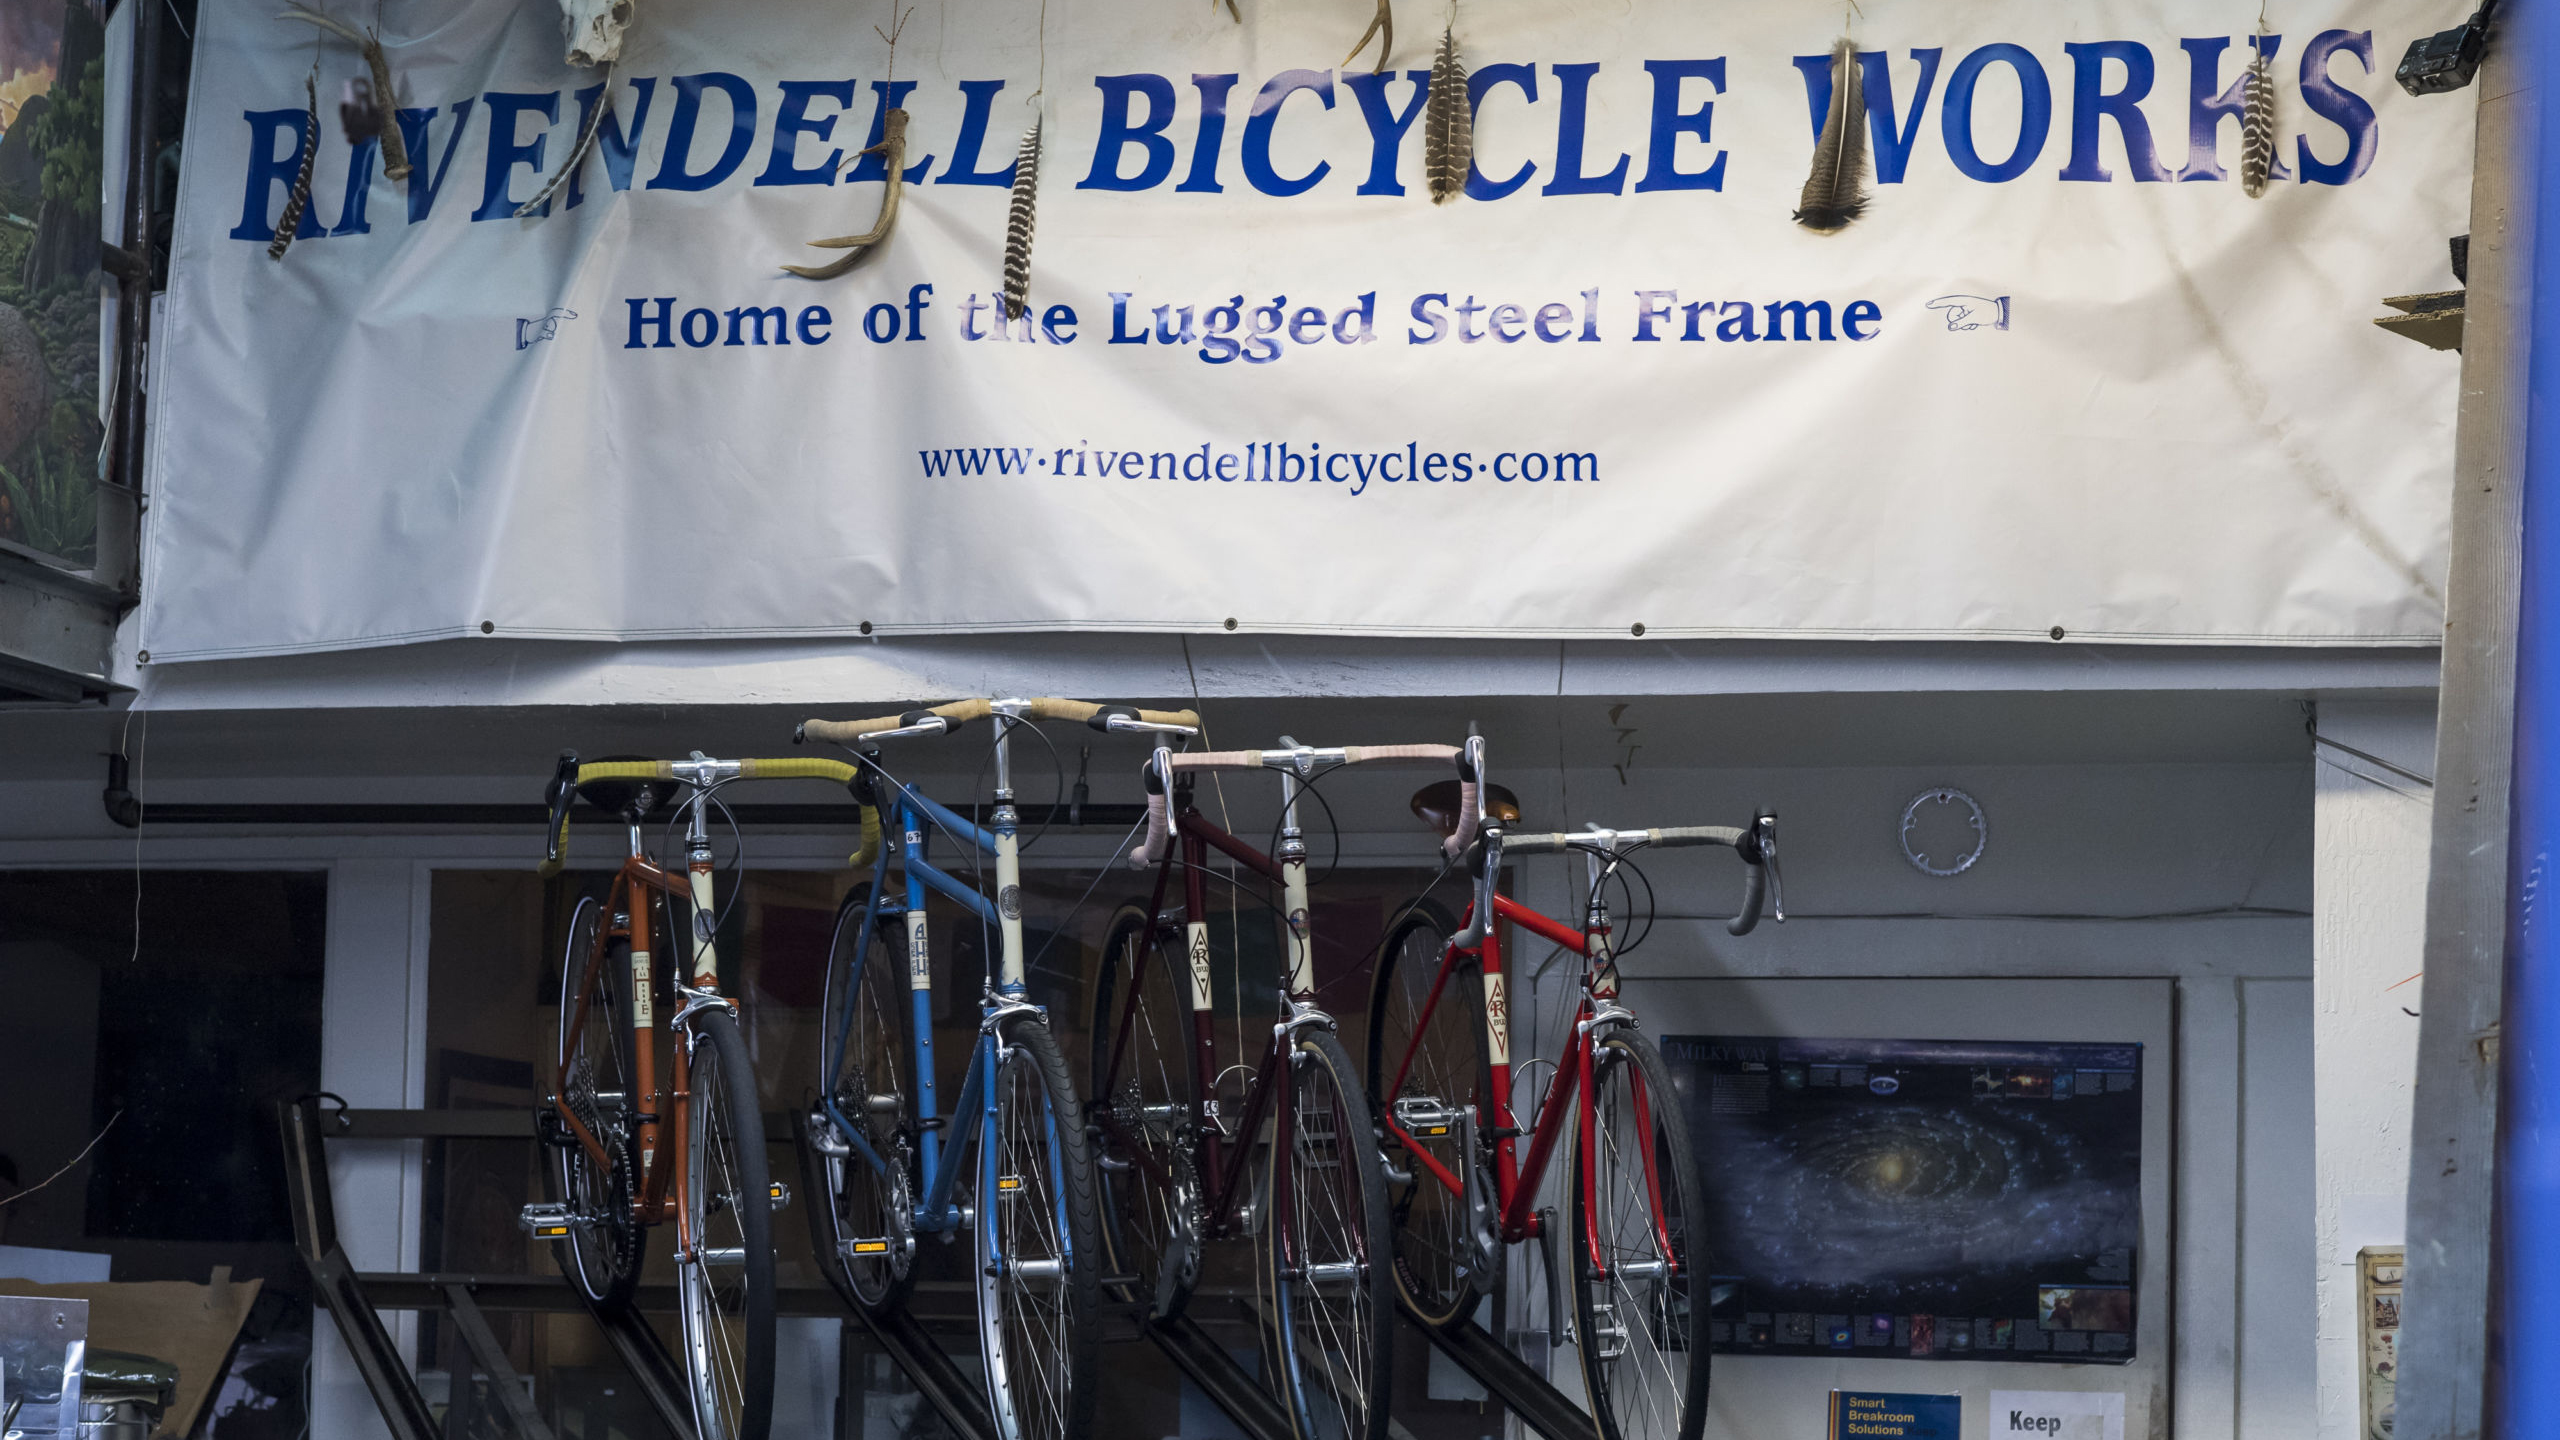 PRESS RELEASE: Center for American Liberty Demands Bay Area Bicycle Shop End Discriminatory Pricing, Threatens Legal Action